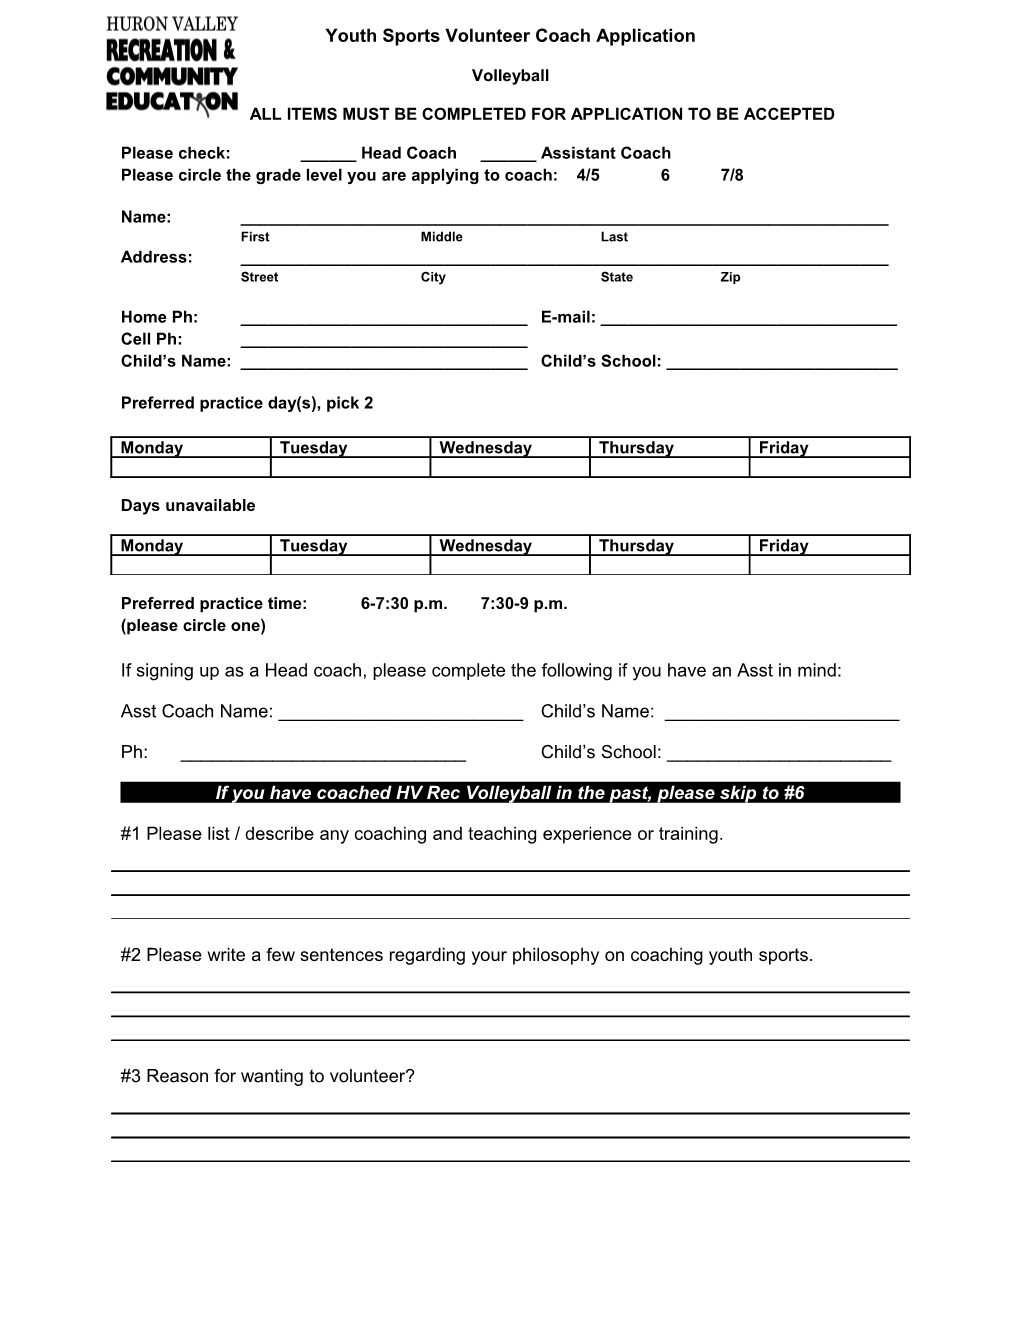 Youth Sports Volunteer Coach Application